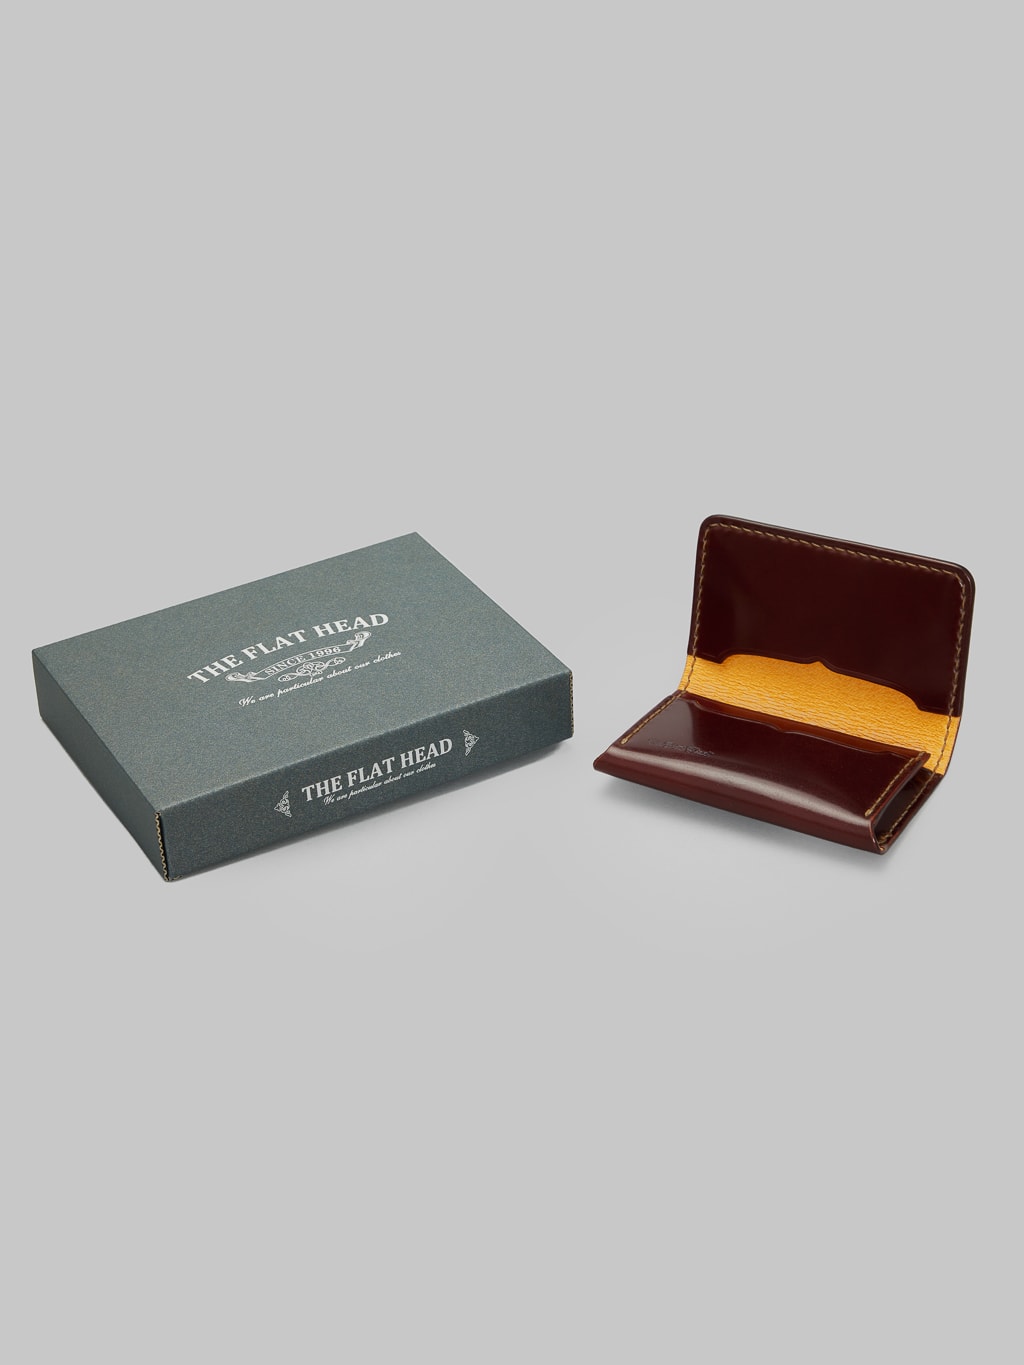 The Flat Head handsewn small cordovan card case brown packaging